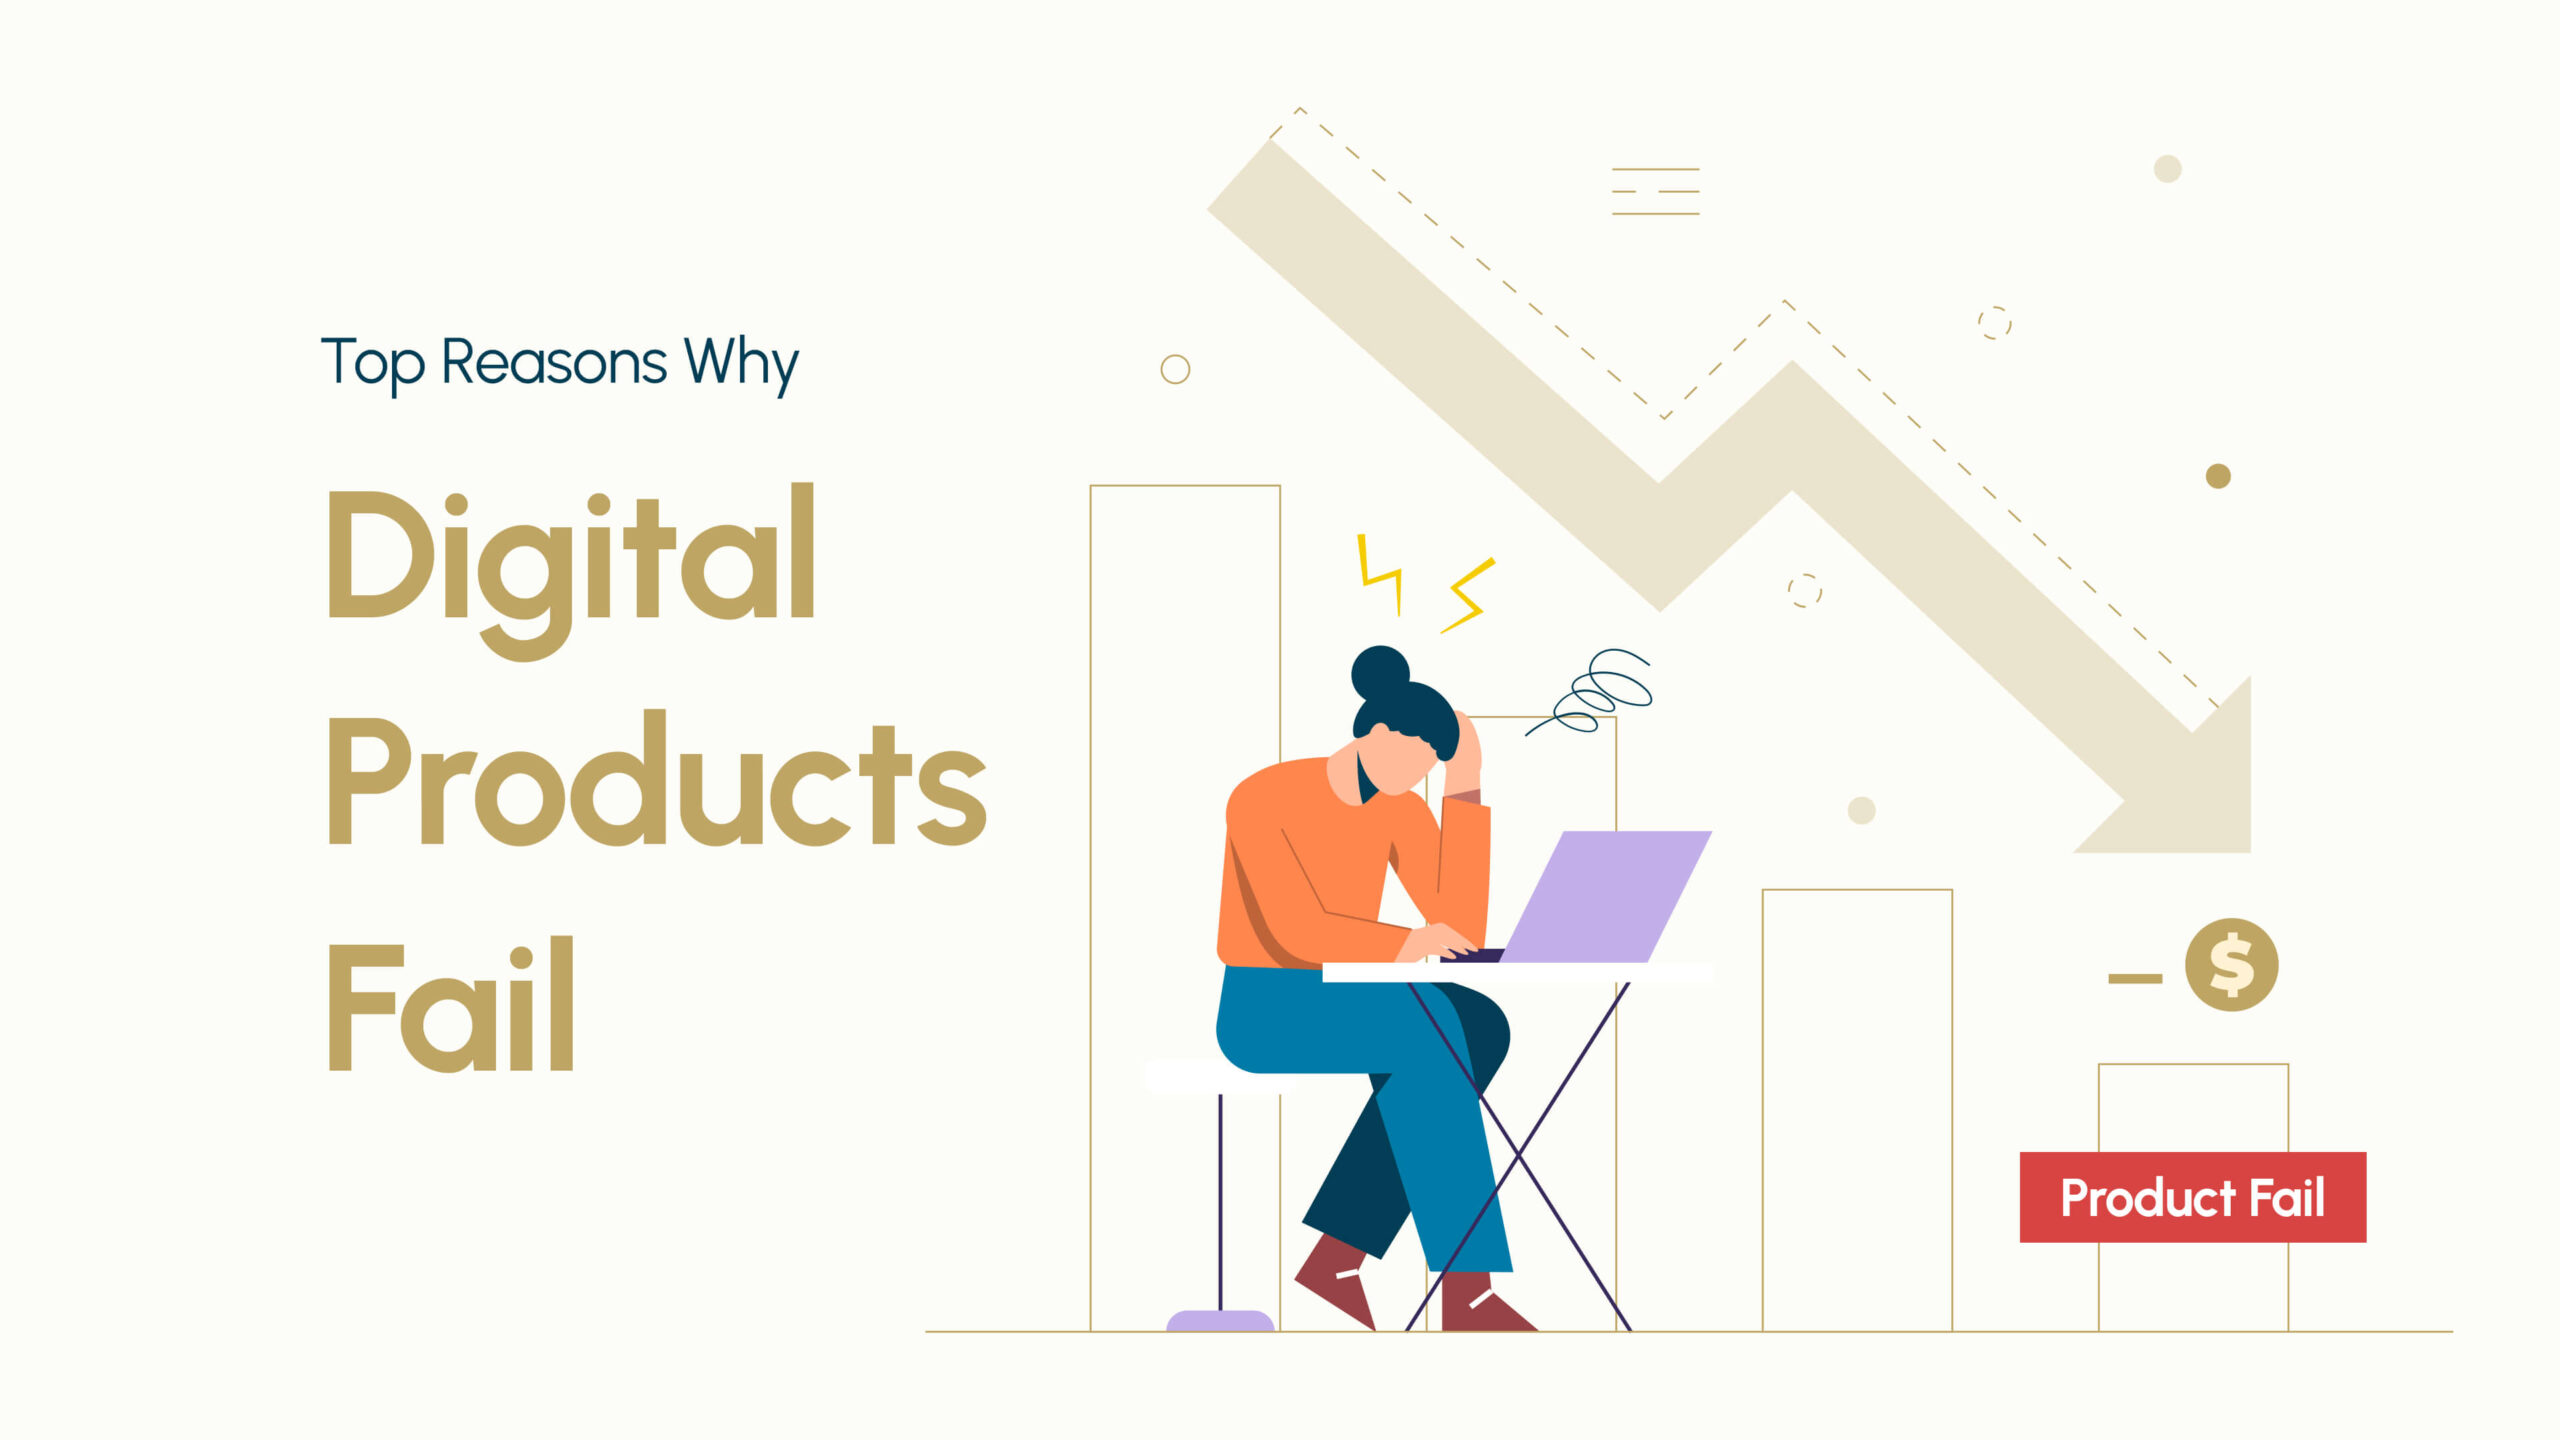 Top Reasons Why Digital Products Fail